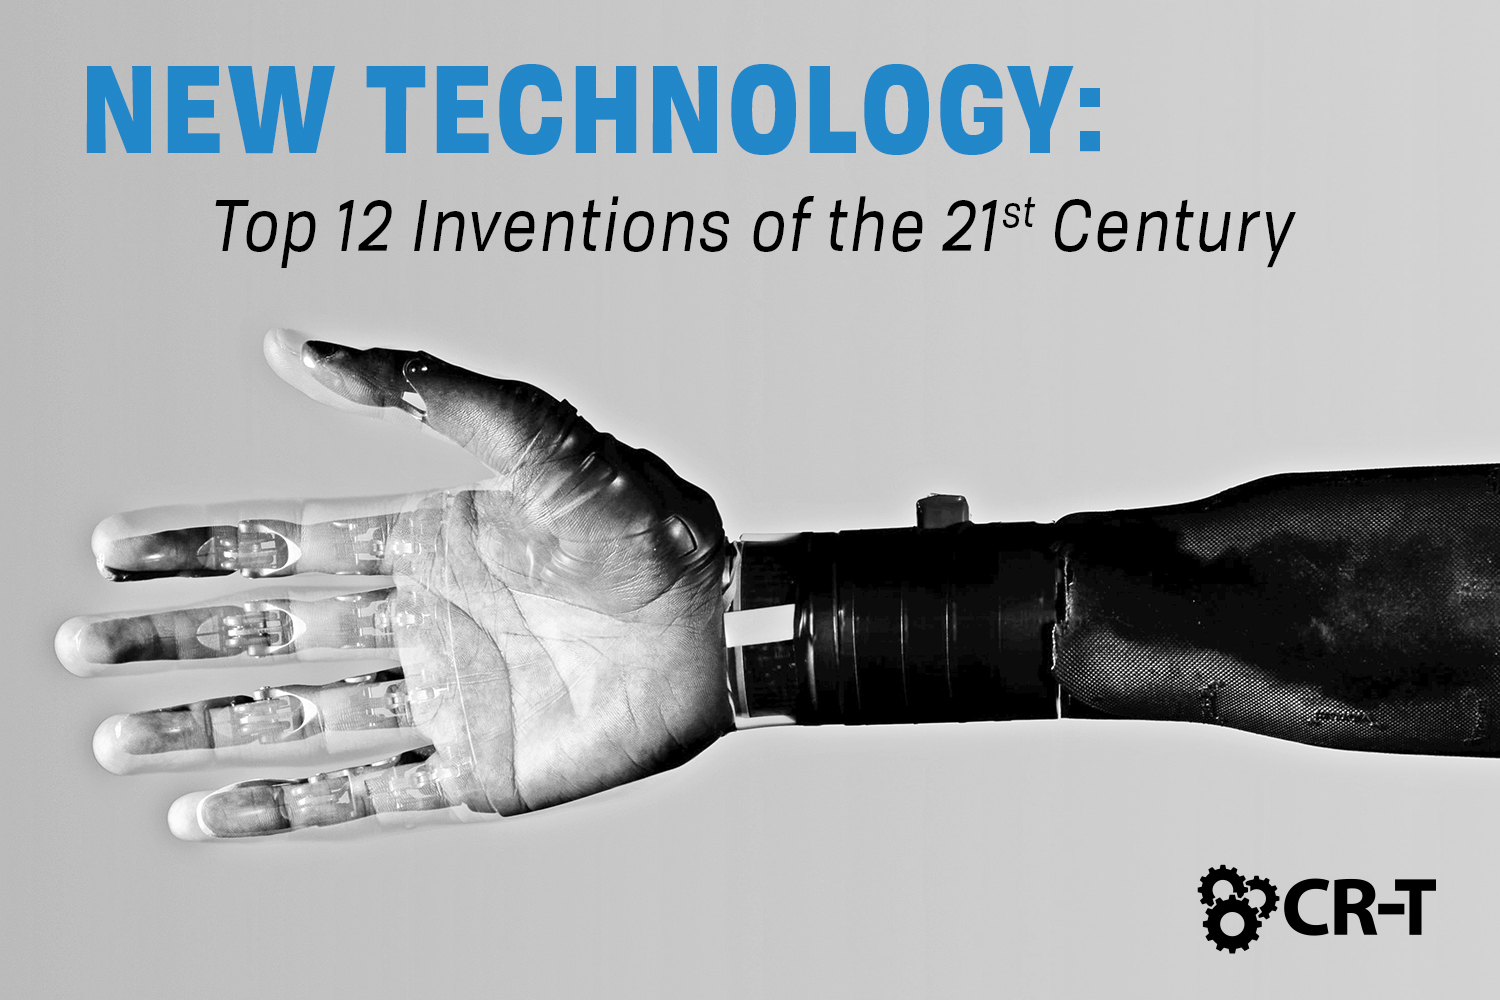 10 inventions that have had the most impact on human society